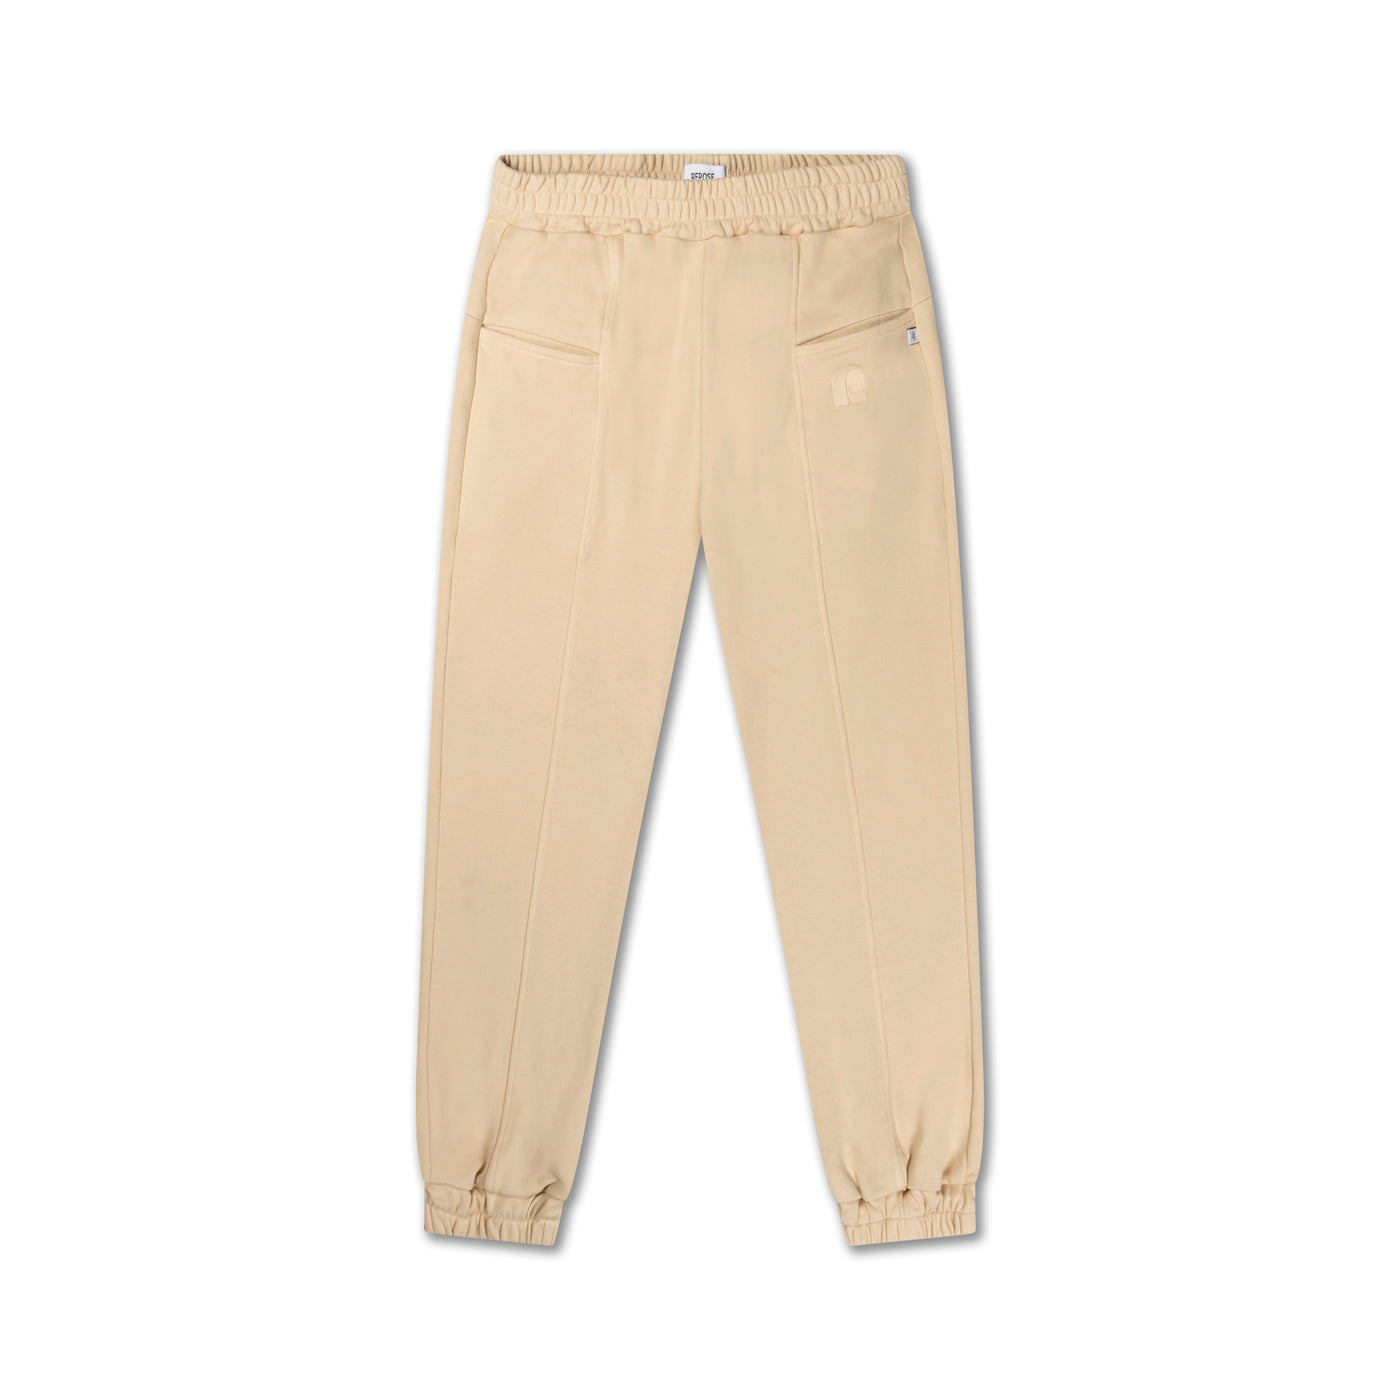 relax pants ivory sand